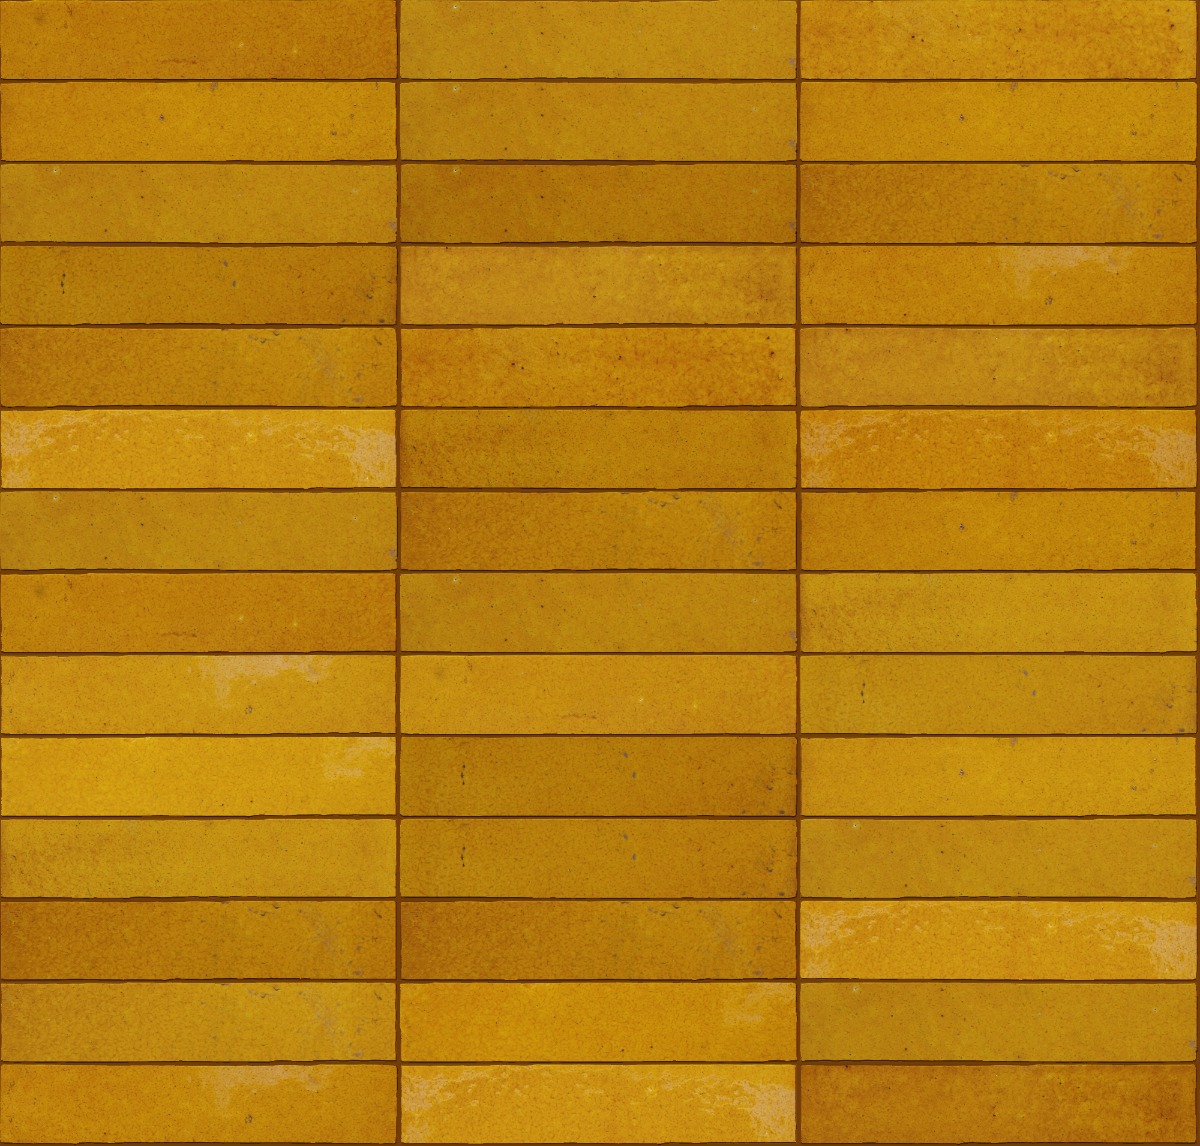 A seamless tile texture with mustard crazed tile tiles arranged in a Stack pattern